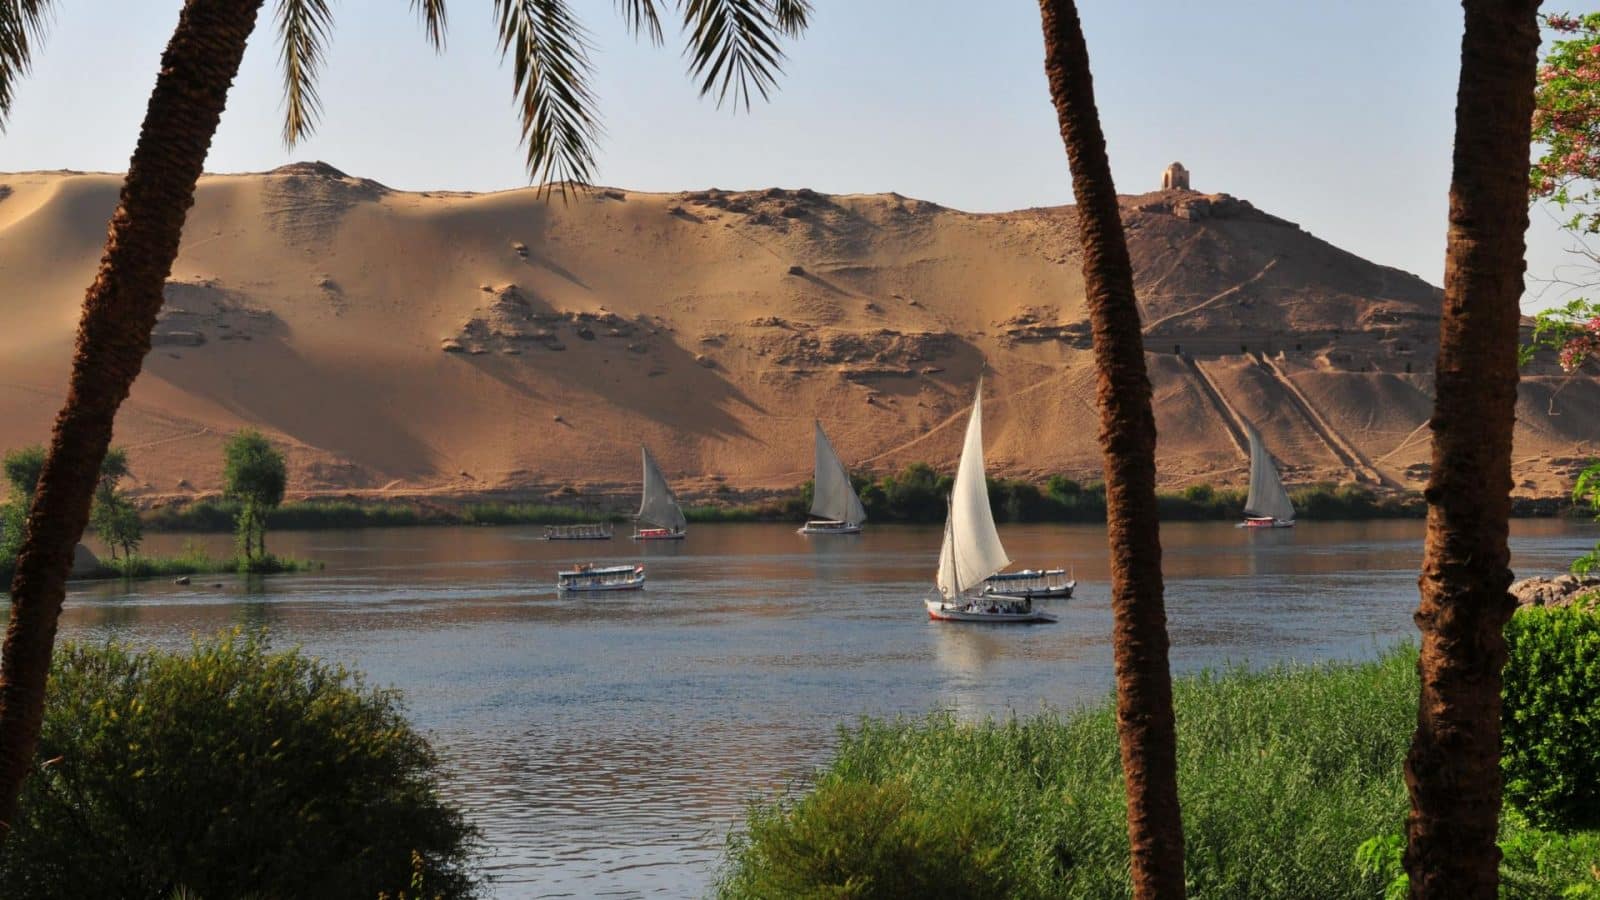 Nile River Wallpapers